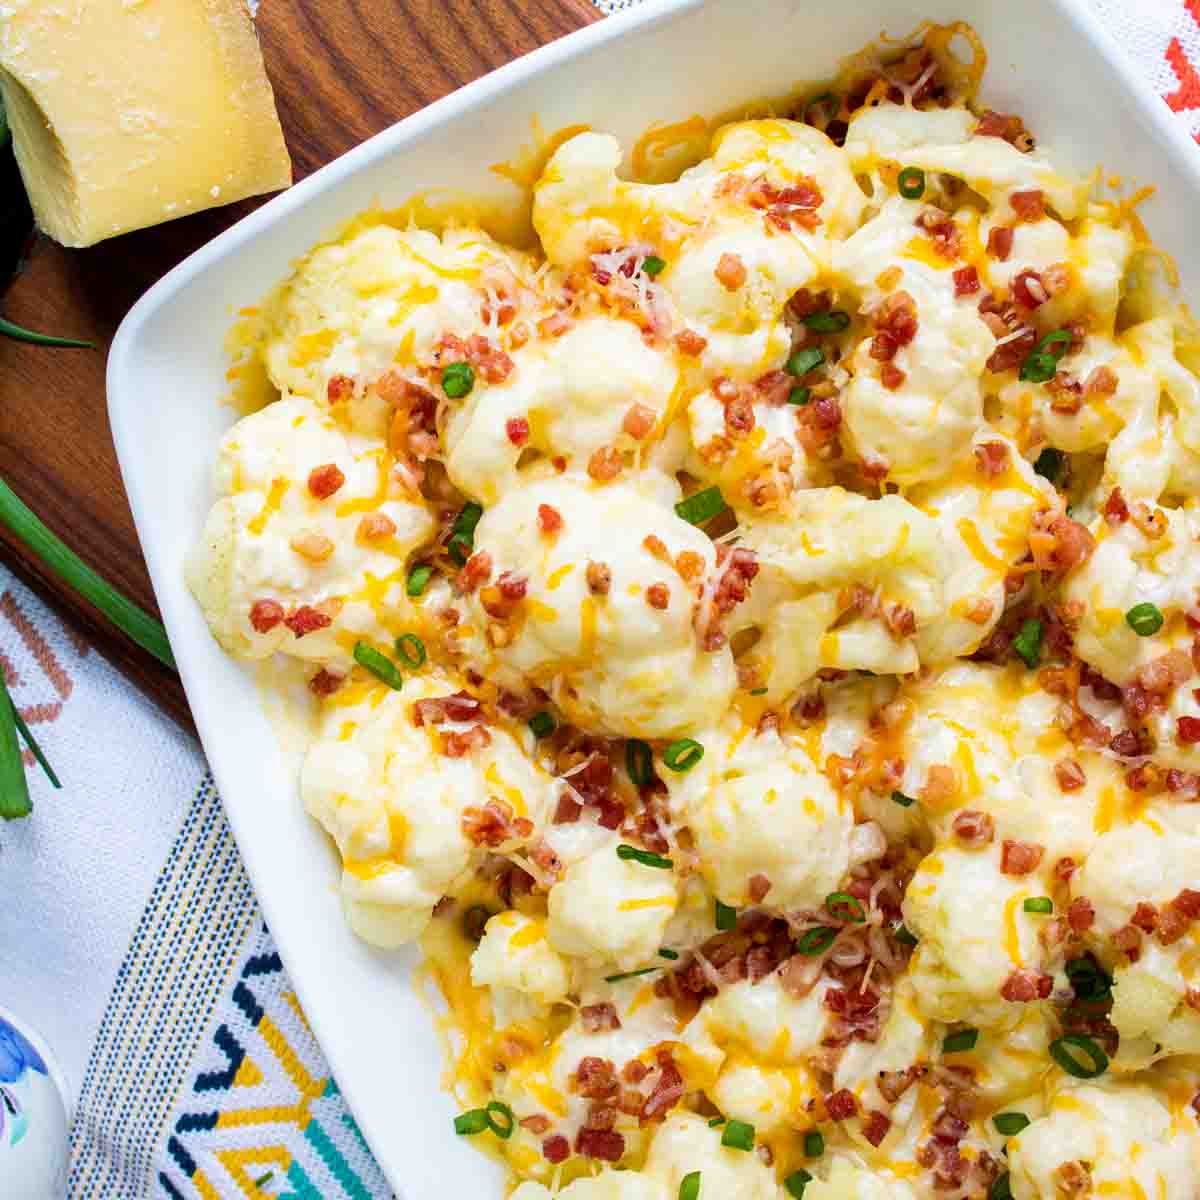 Baked Cauliflower with Cheese Casserole made with cheddar cheese